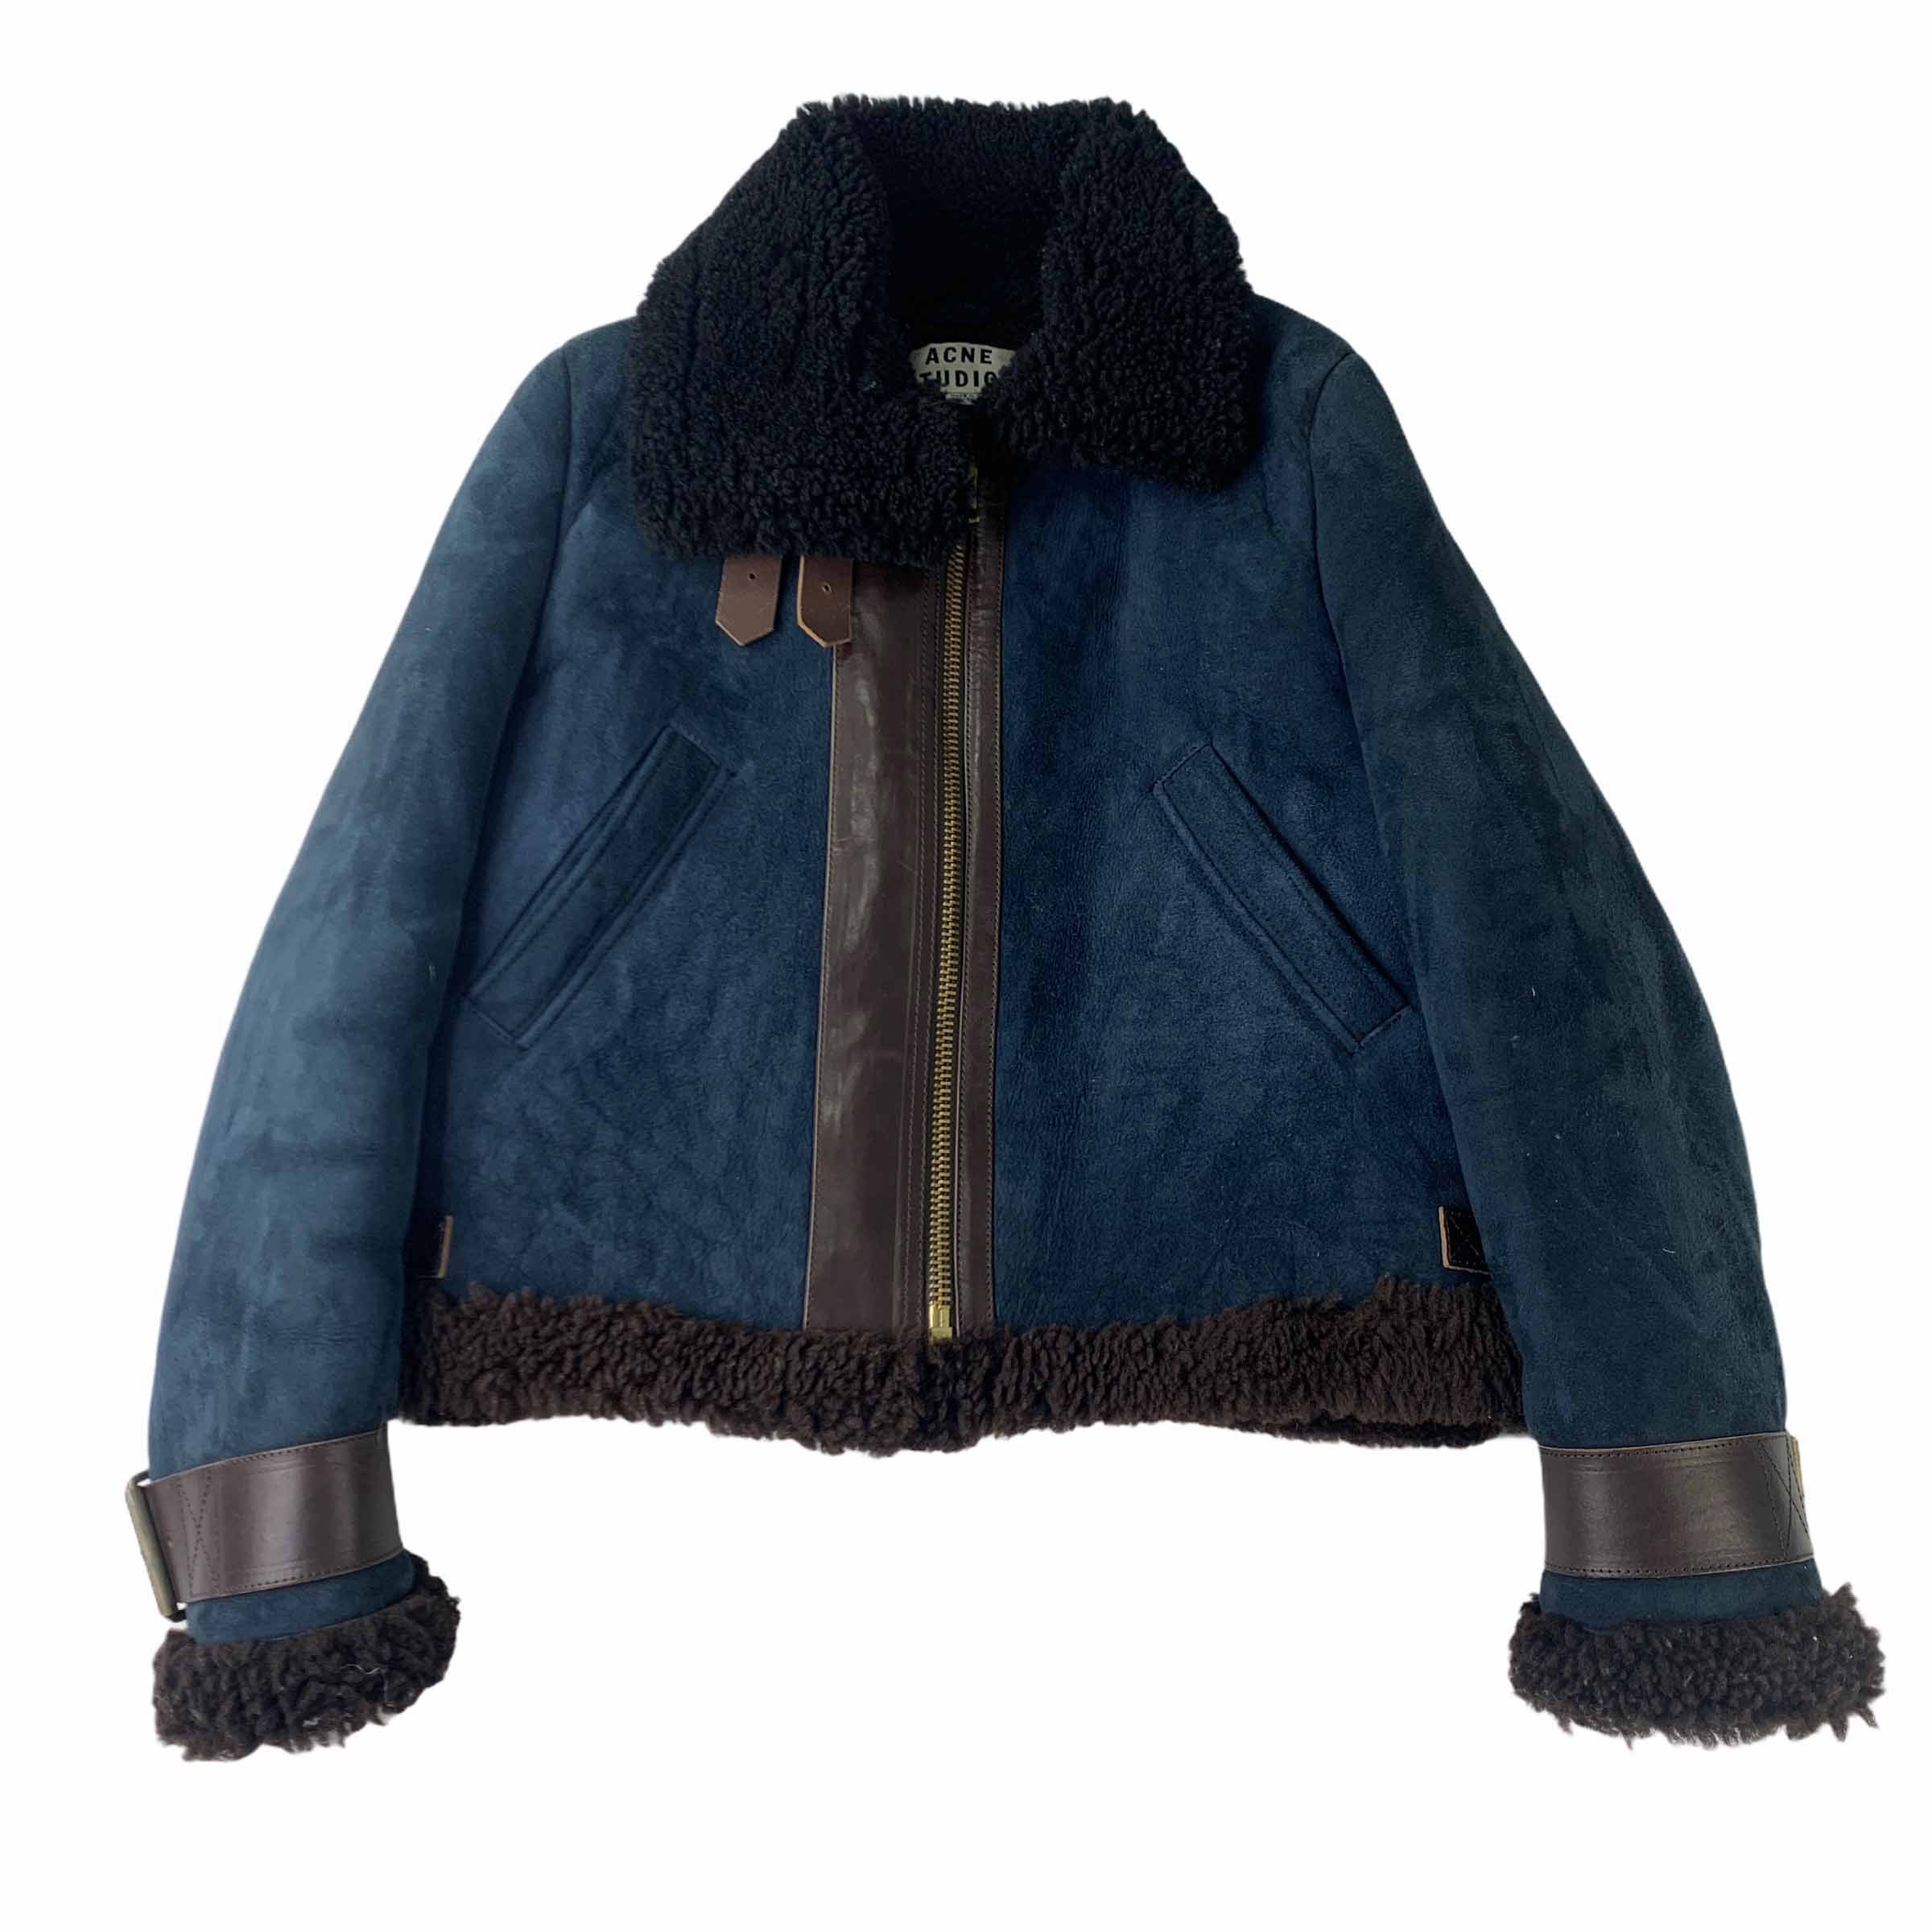 [Acne Studio] Mustang Belted Jacket Navy - Size 38